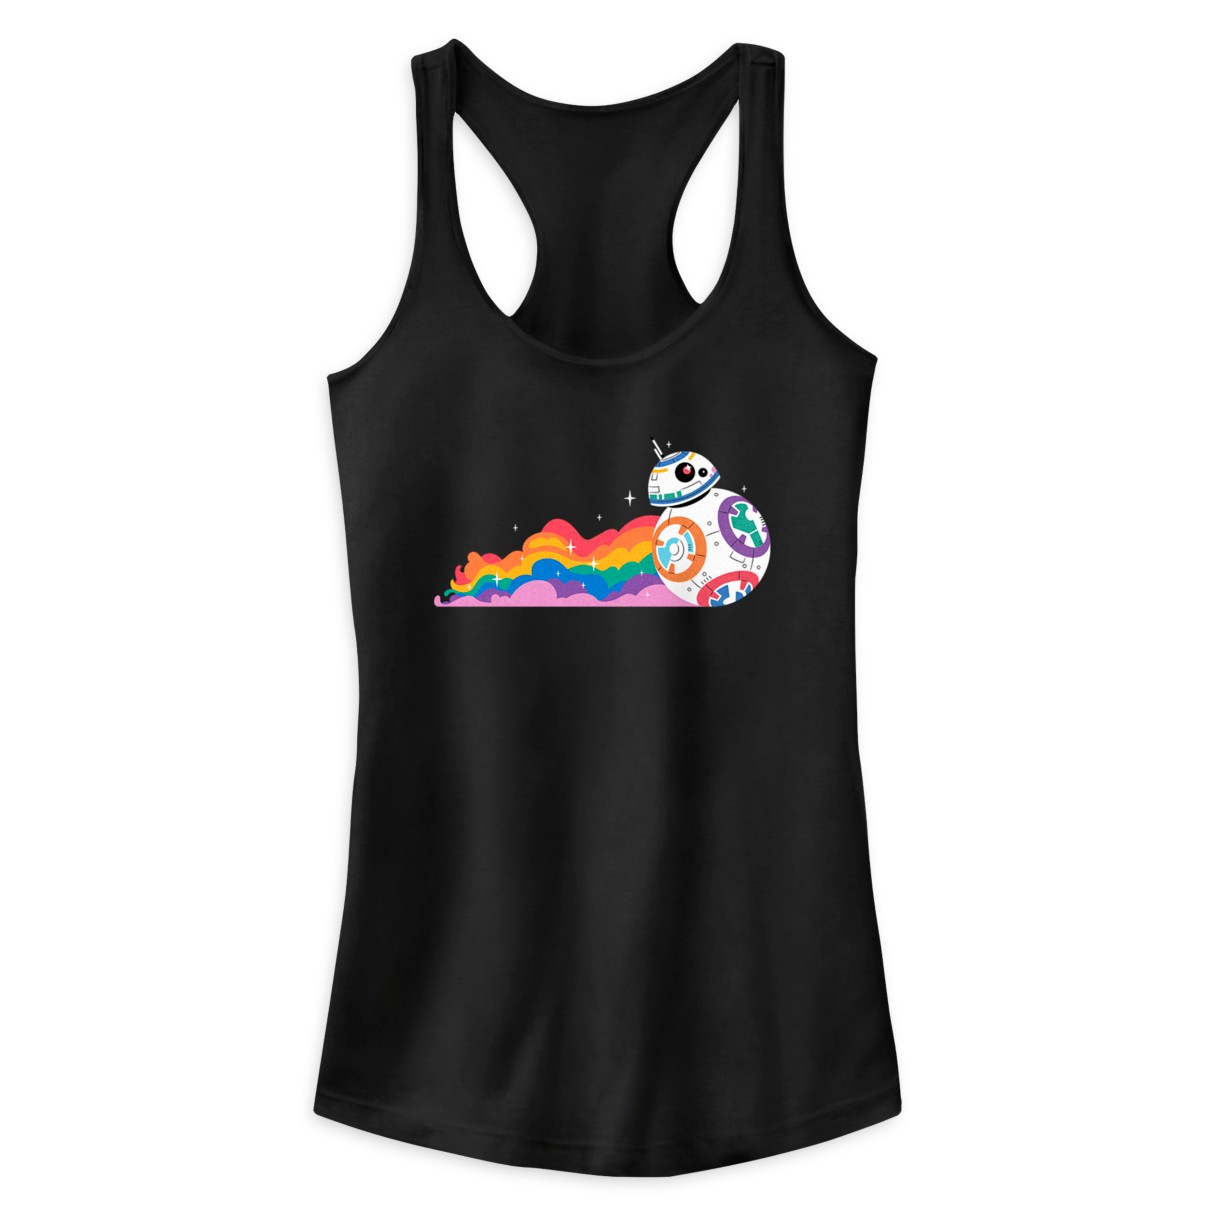 BB-8 Tank Top for Women – Star Wars Pride Collection